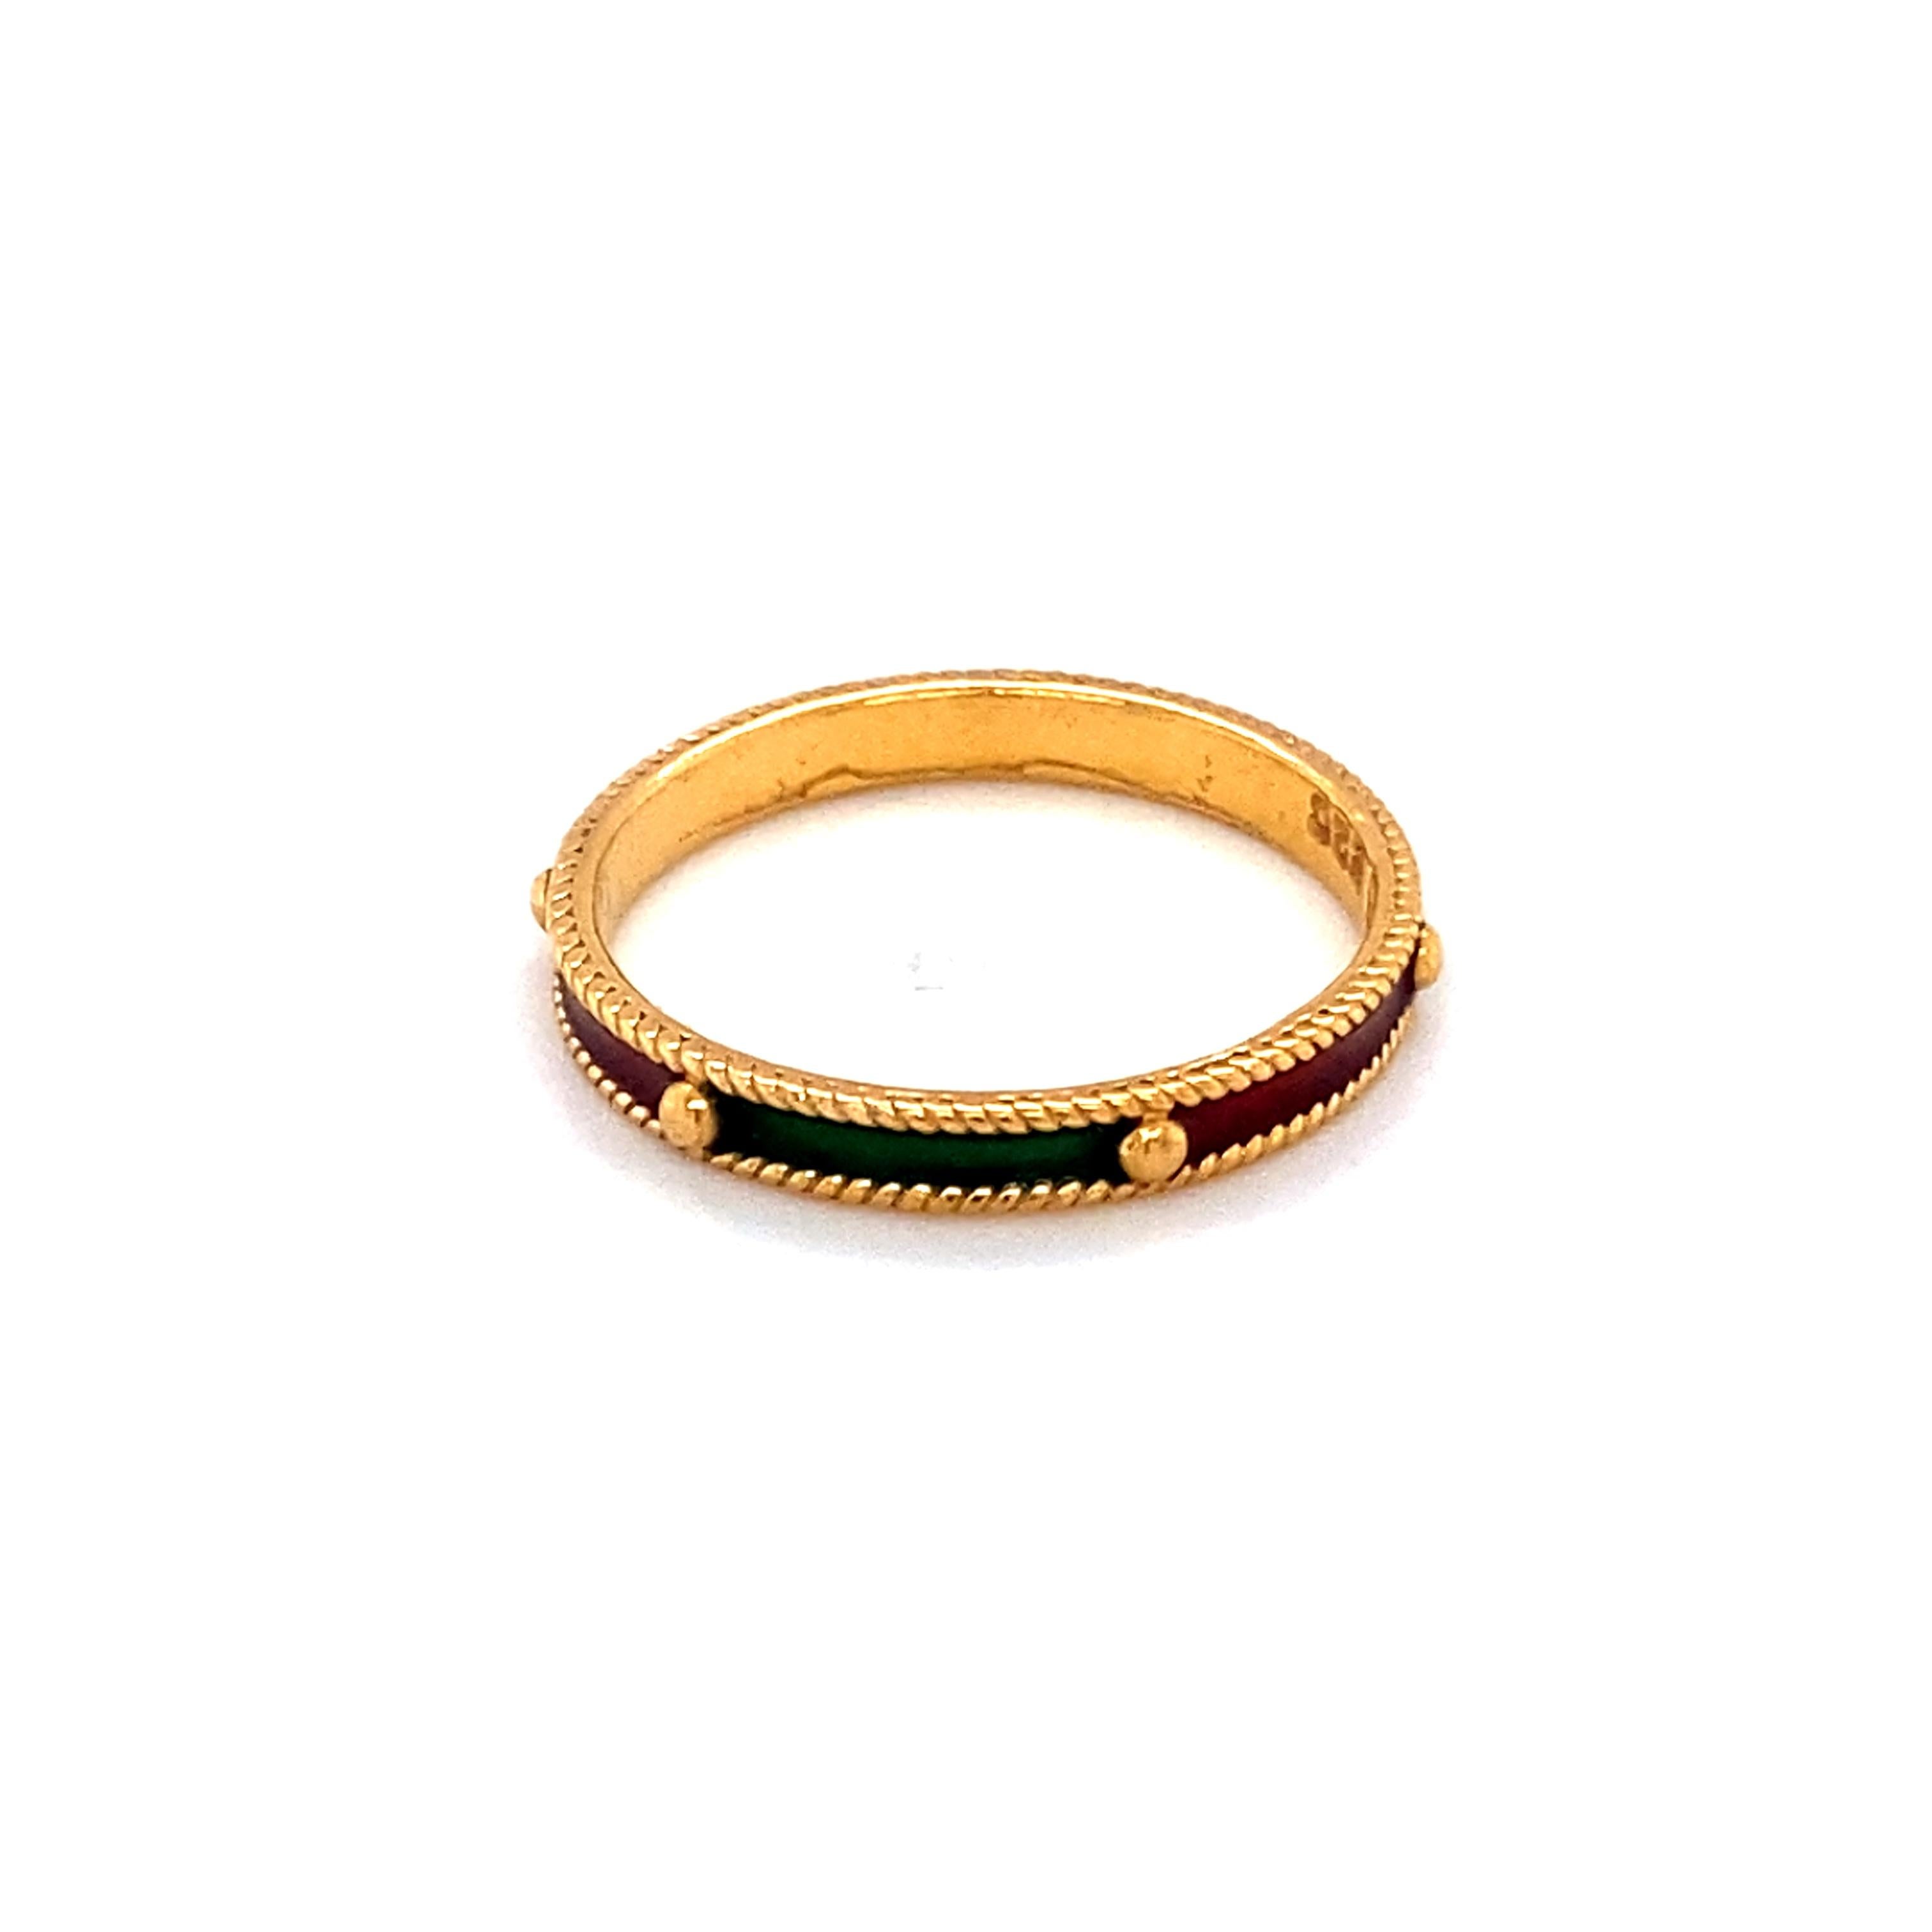 Item Details:
Metal type: 22 Karat Yellow Gold 
Weight: 1.9 grams 
Size: 6

Item Features:
Multicolored enamel - red and green
Vintage, 1970s 
High contrast 22 karat yellow gold gives it an overall stunning finish, it shines beautifully against the